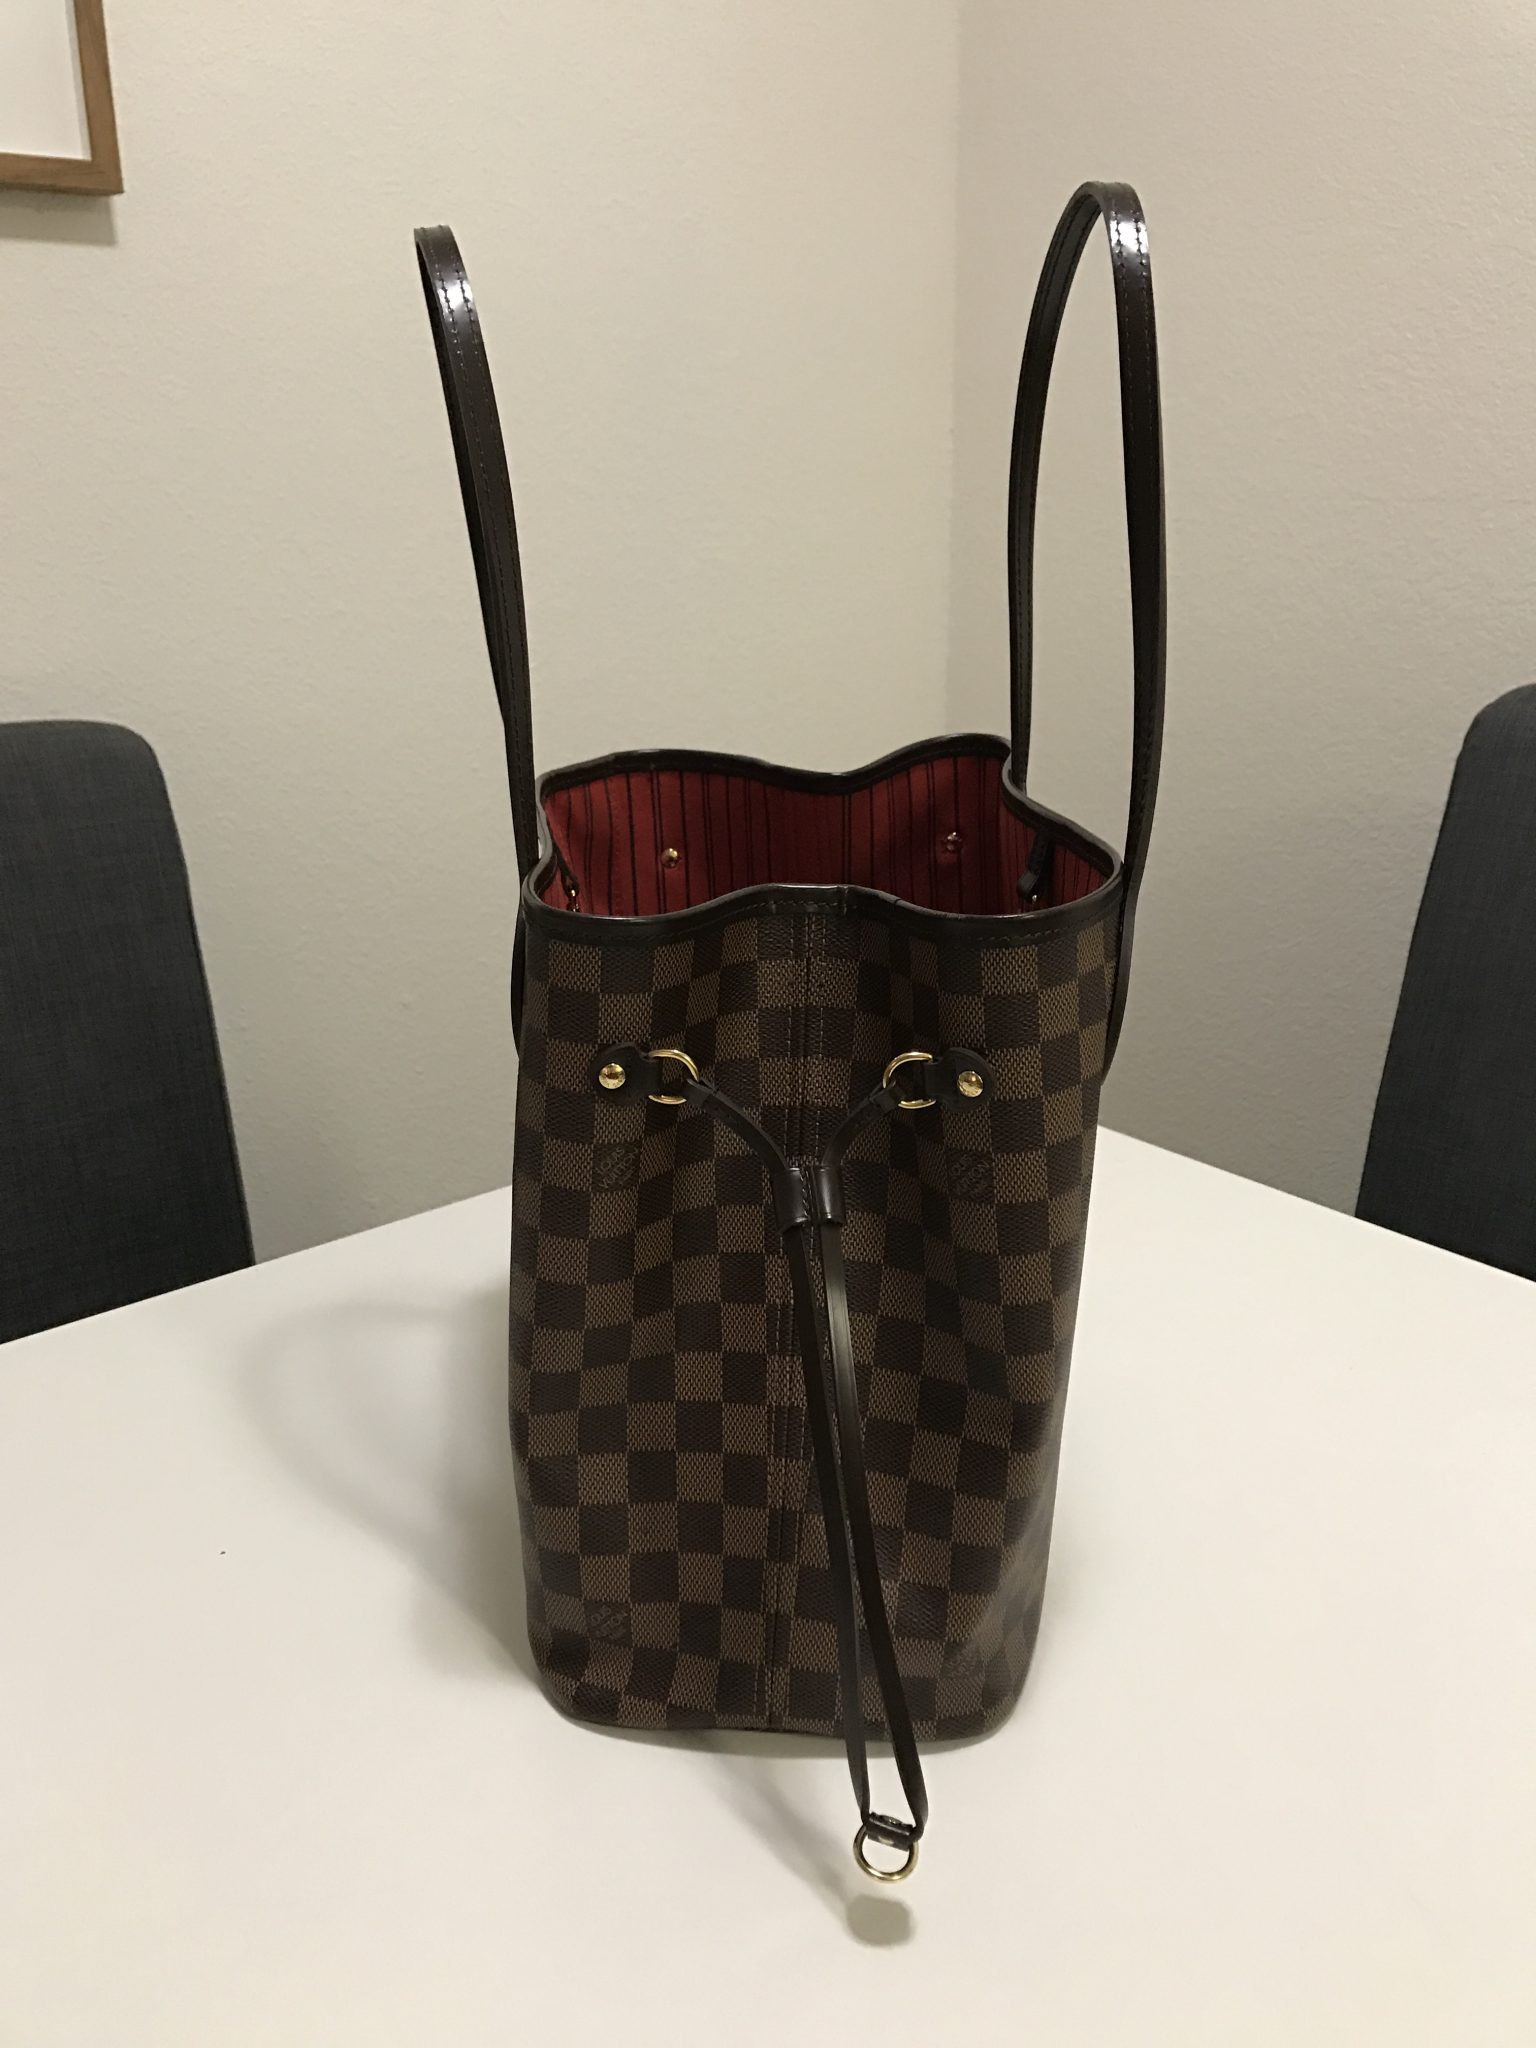 ✨Gently used neverfull mm. As is - some wear to leather trim